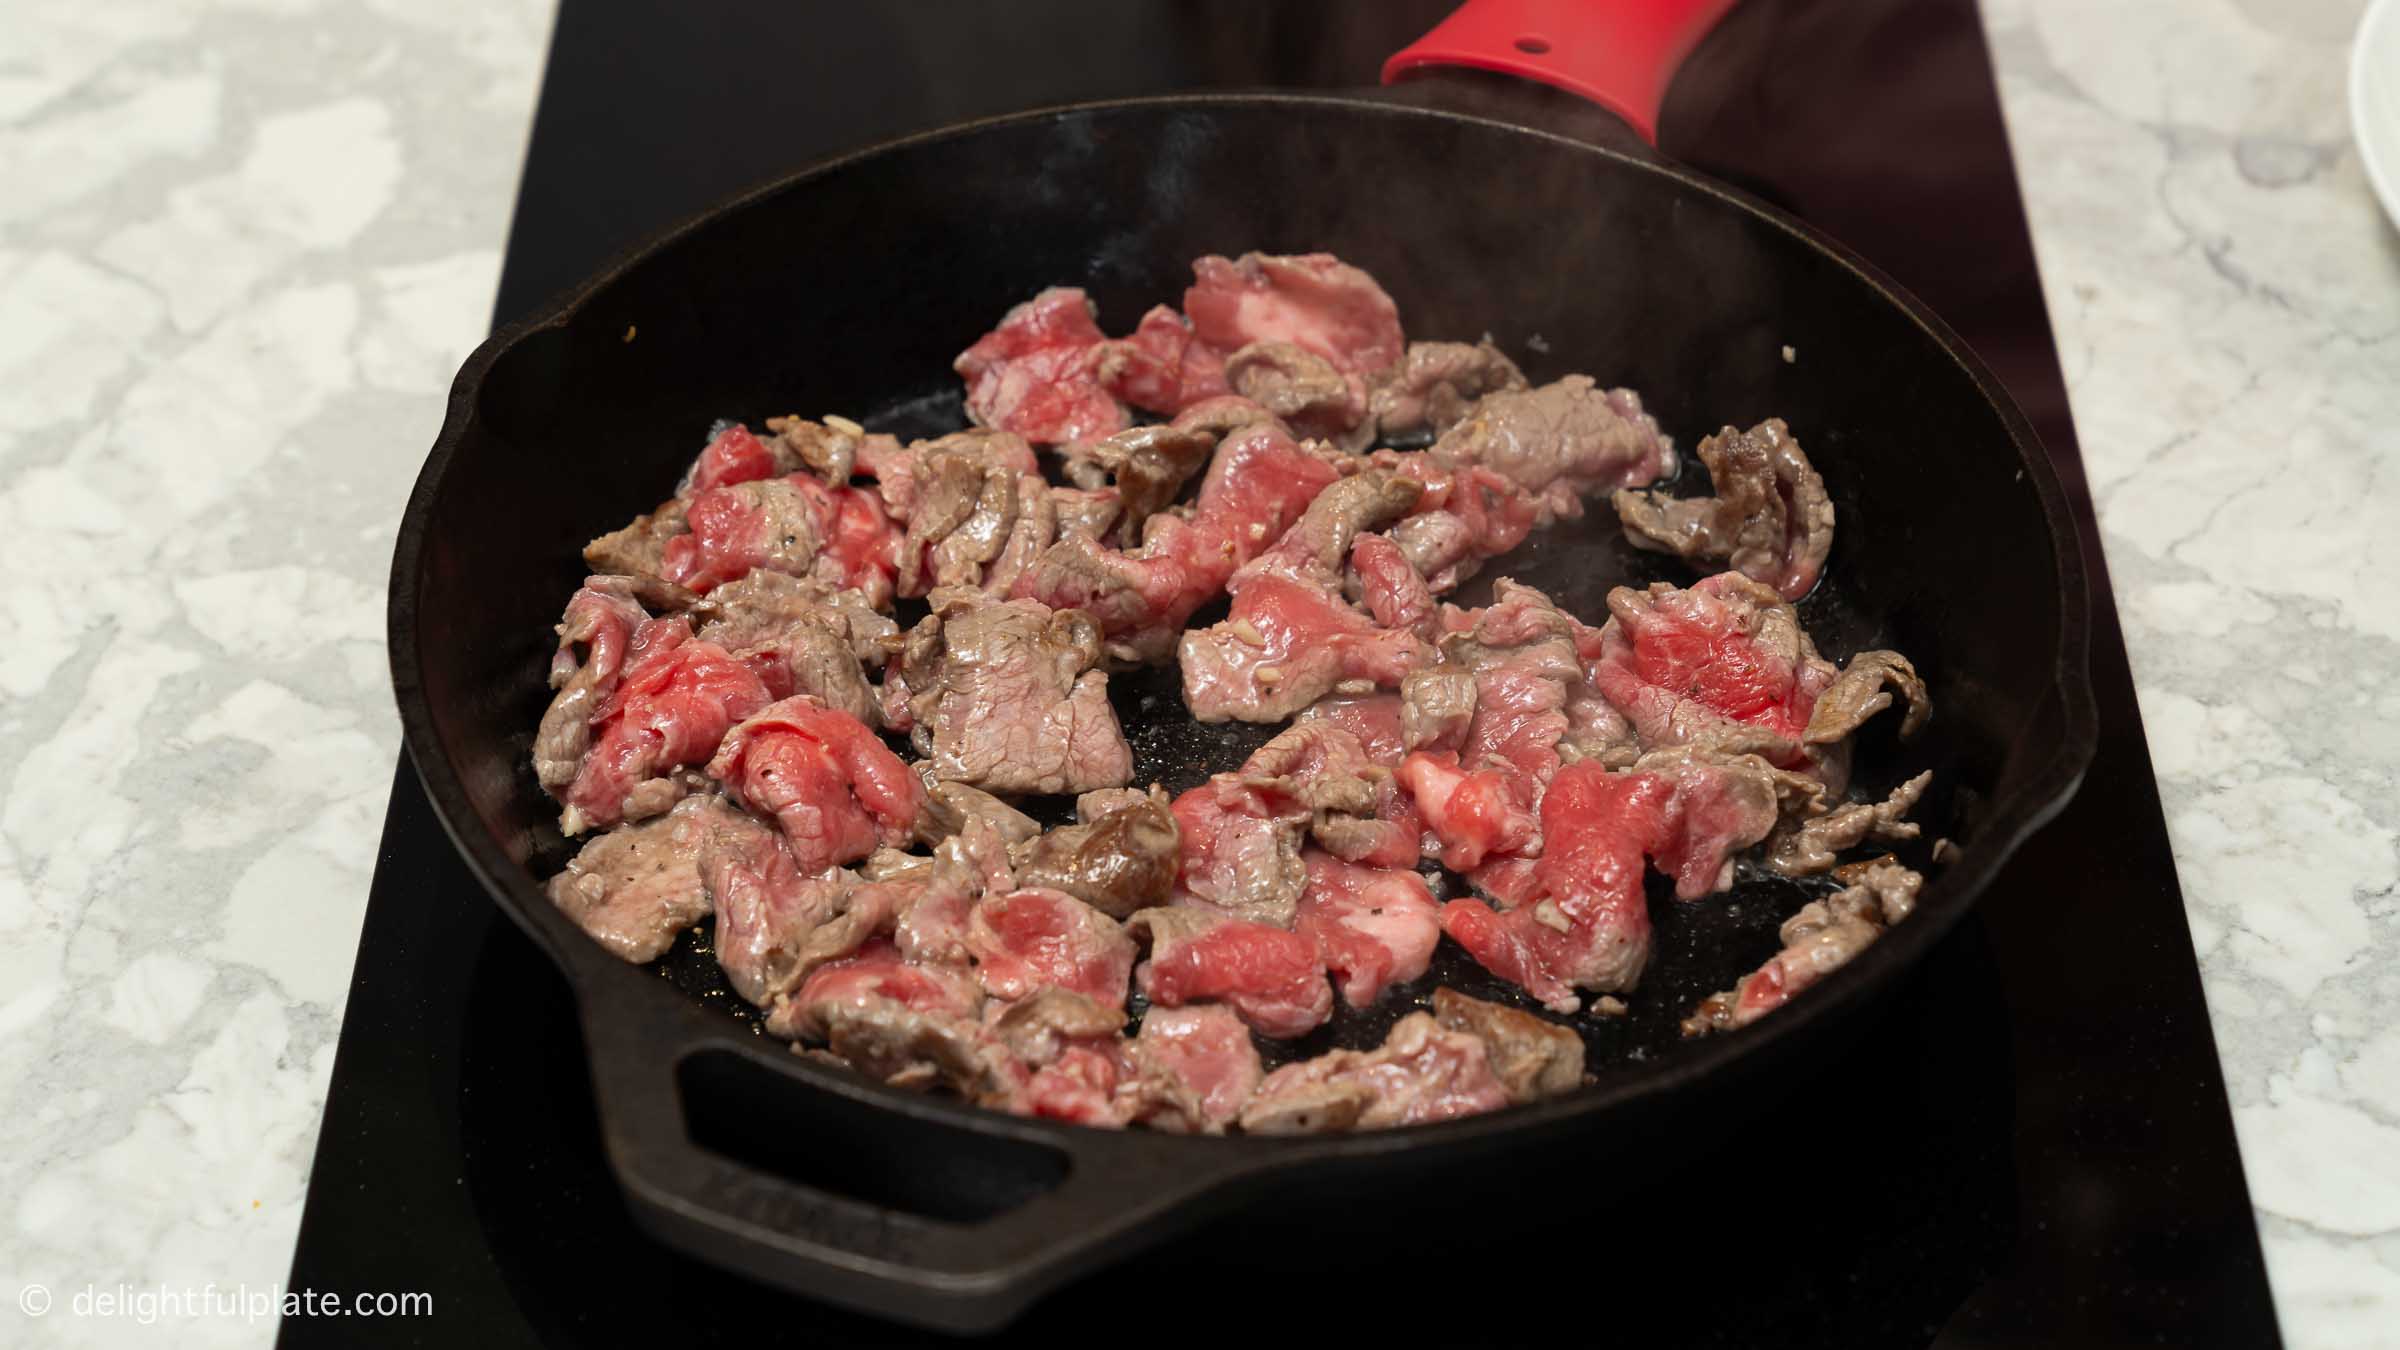 beef slices being stir-fried in a cast iron pan.